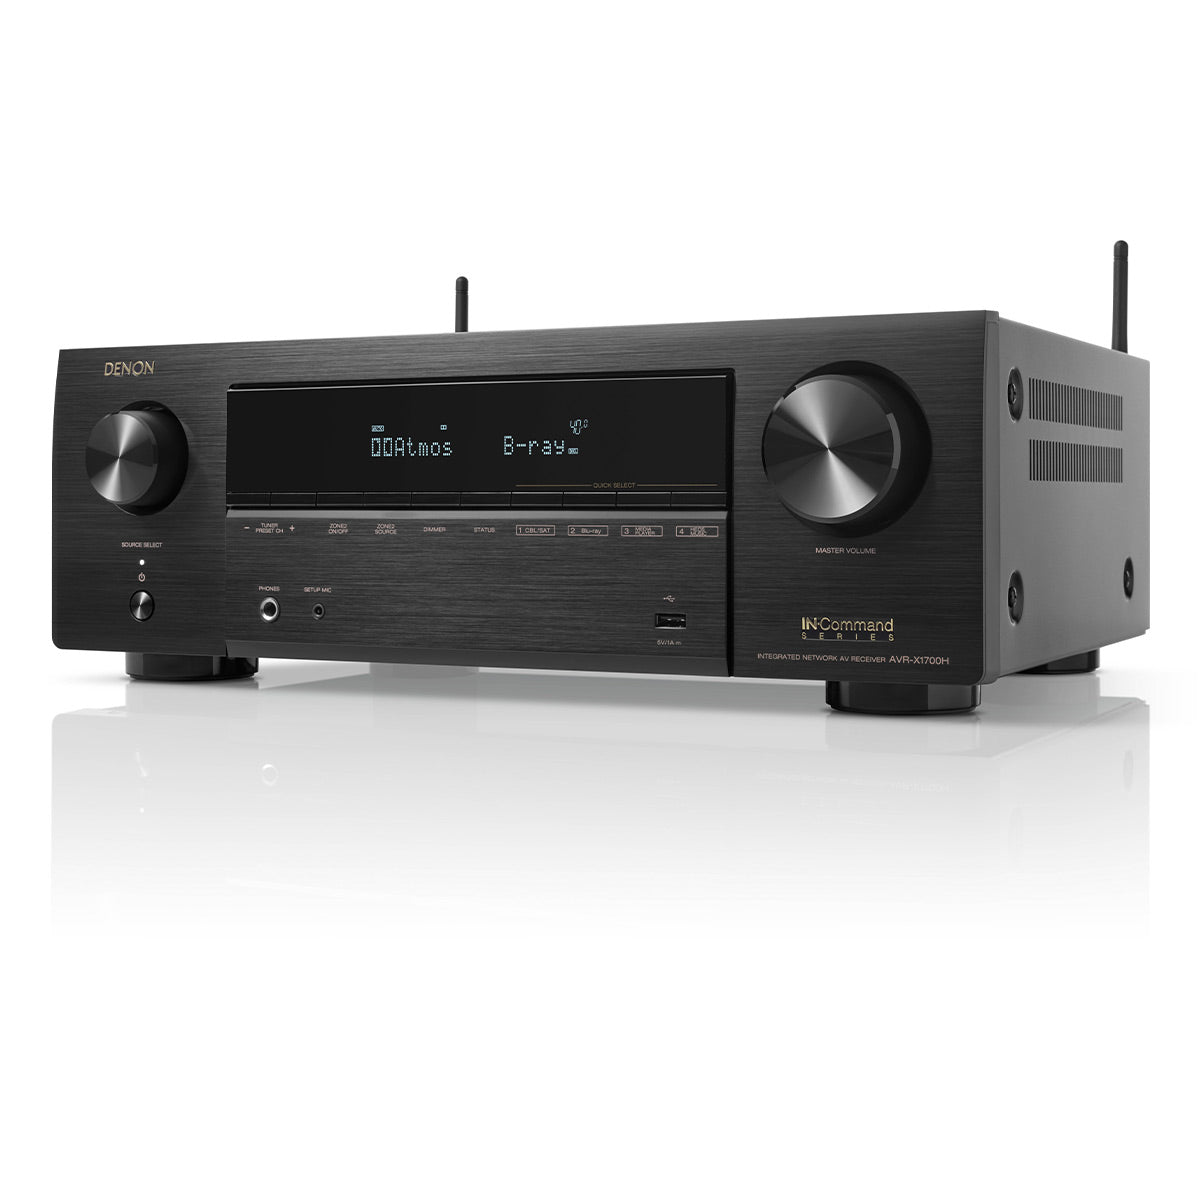 Denon AVR-X1700H 7.2ch 8K Home Theater Receiver with 3D Audio, Voice Control, and HEOS Built-In